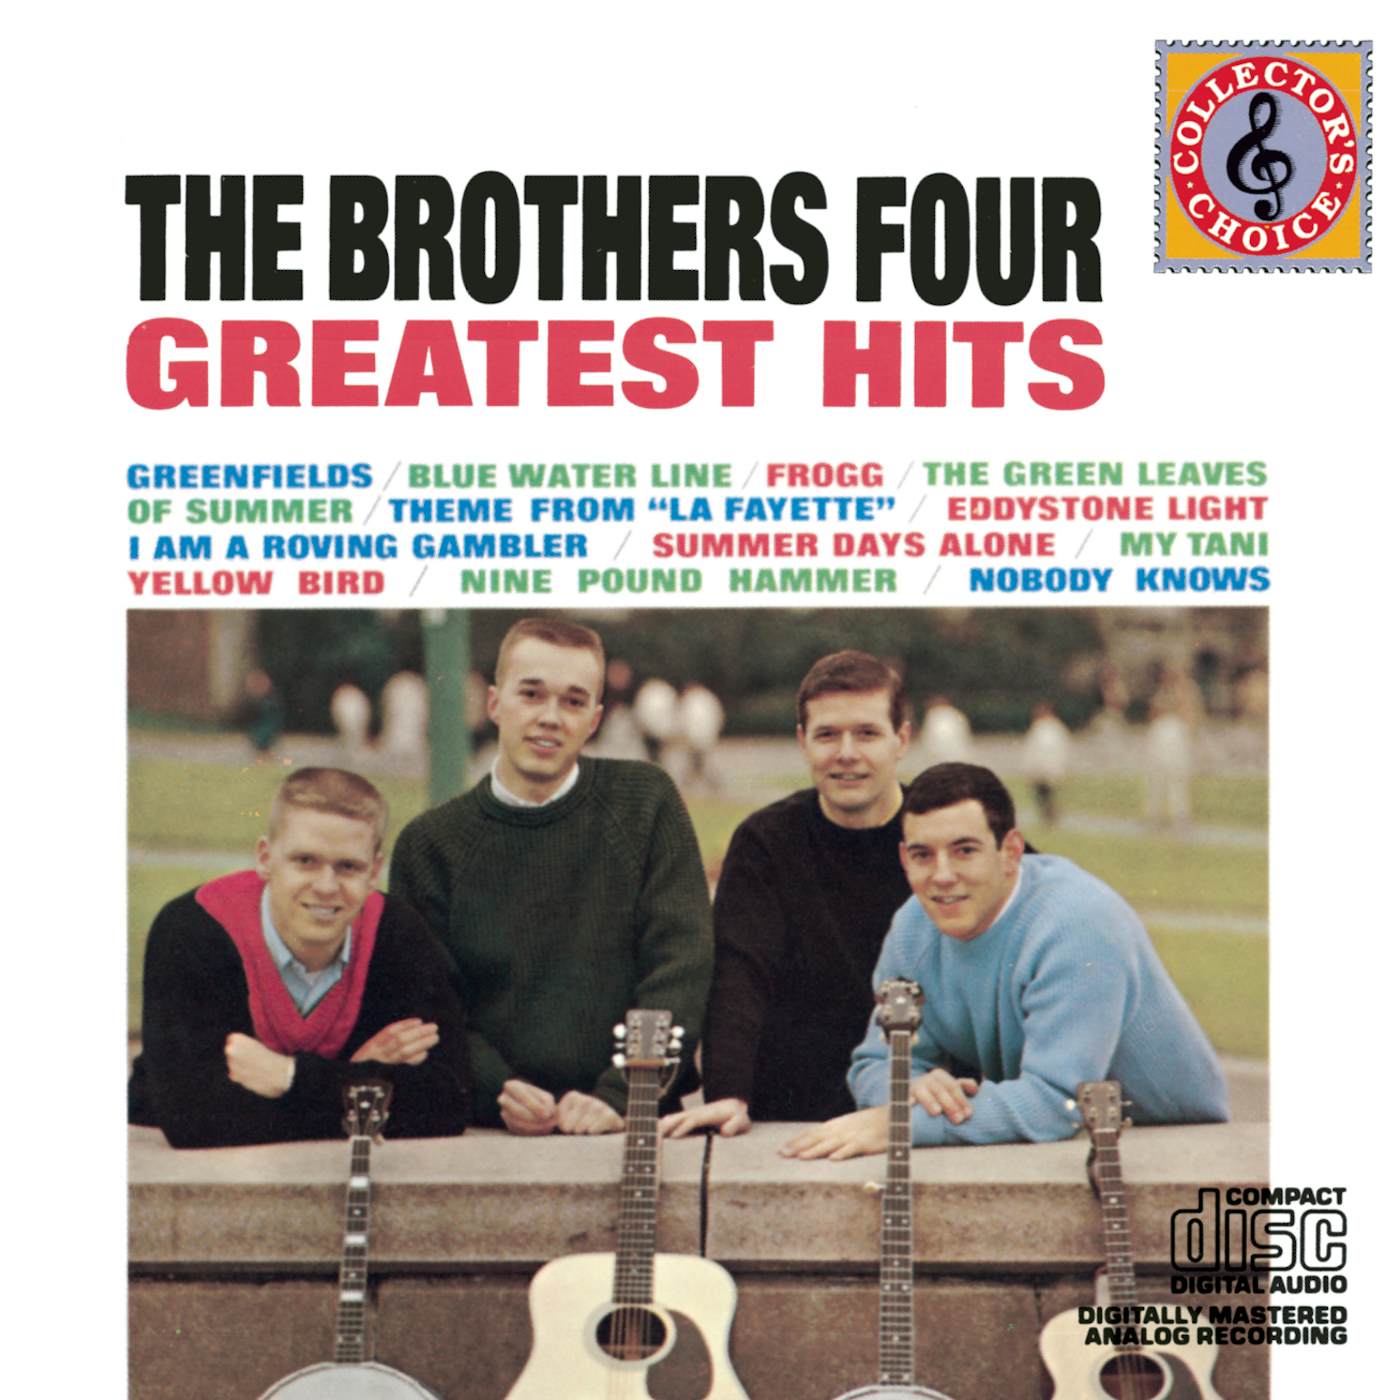 The Brothers Four GREATEST HITS CD